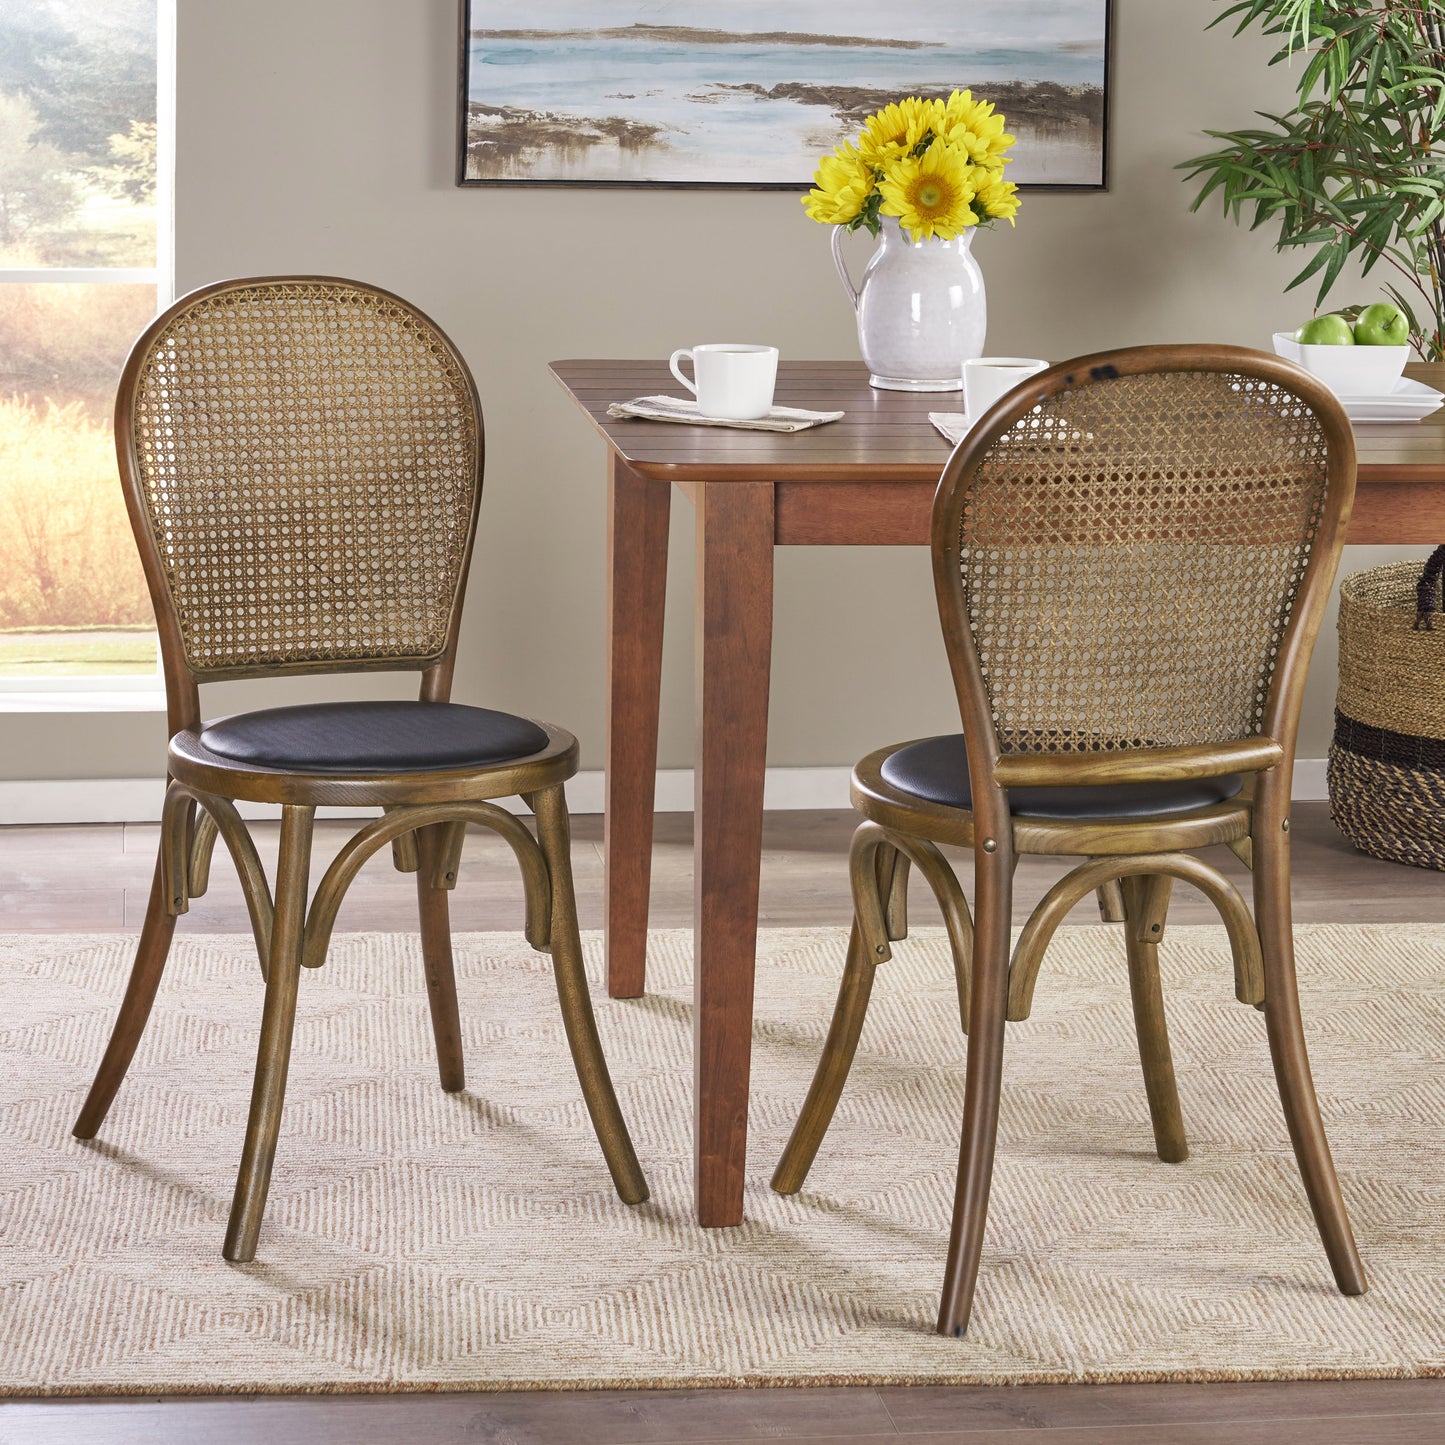 Emerys Wooden Cane Back Dining Chair (Set of 2)